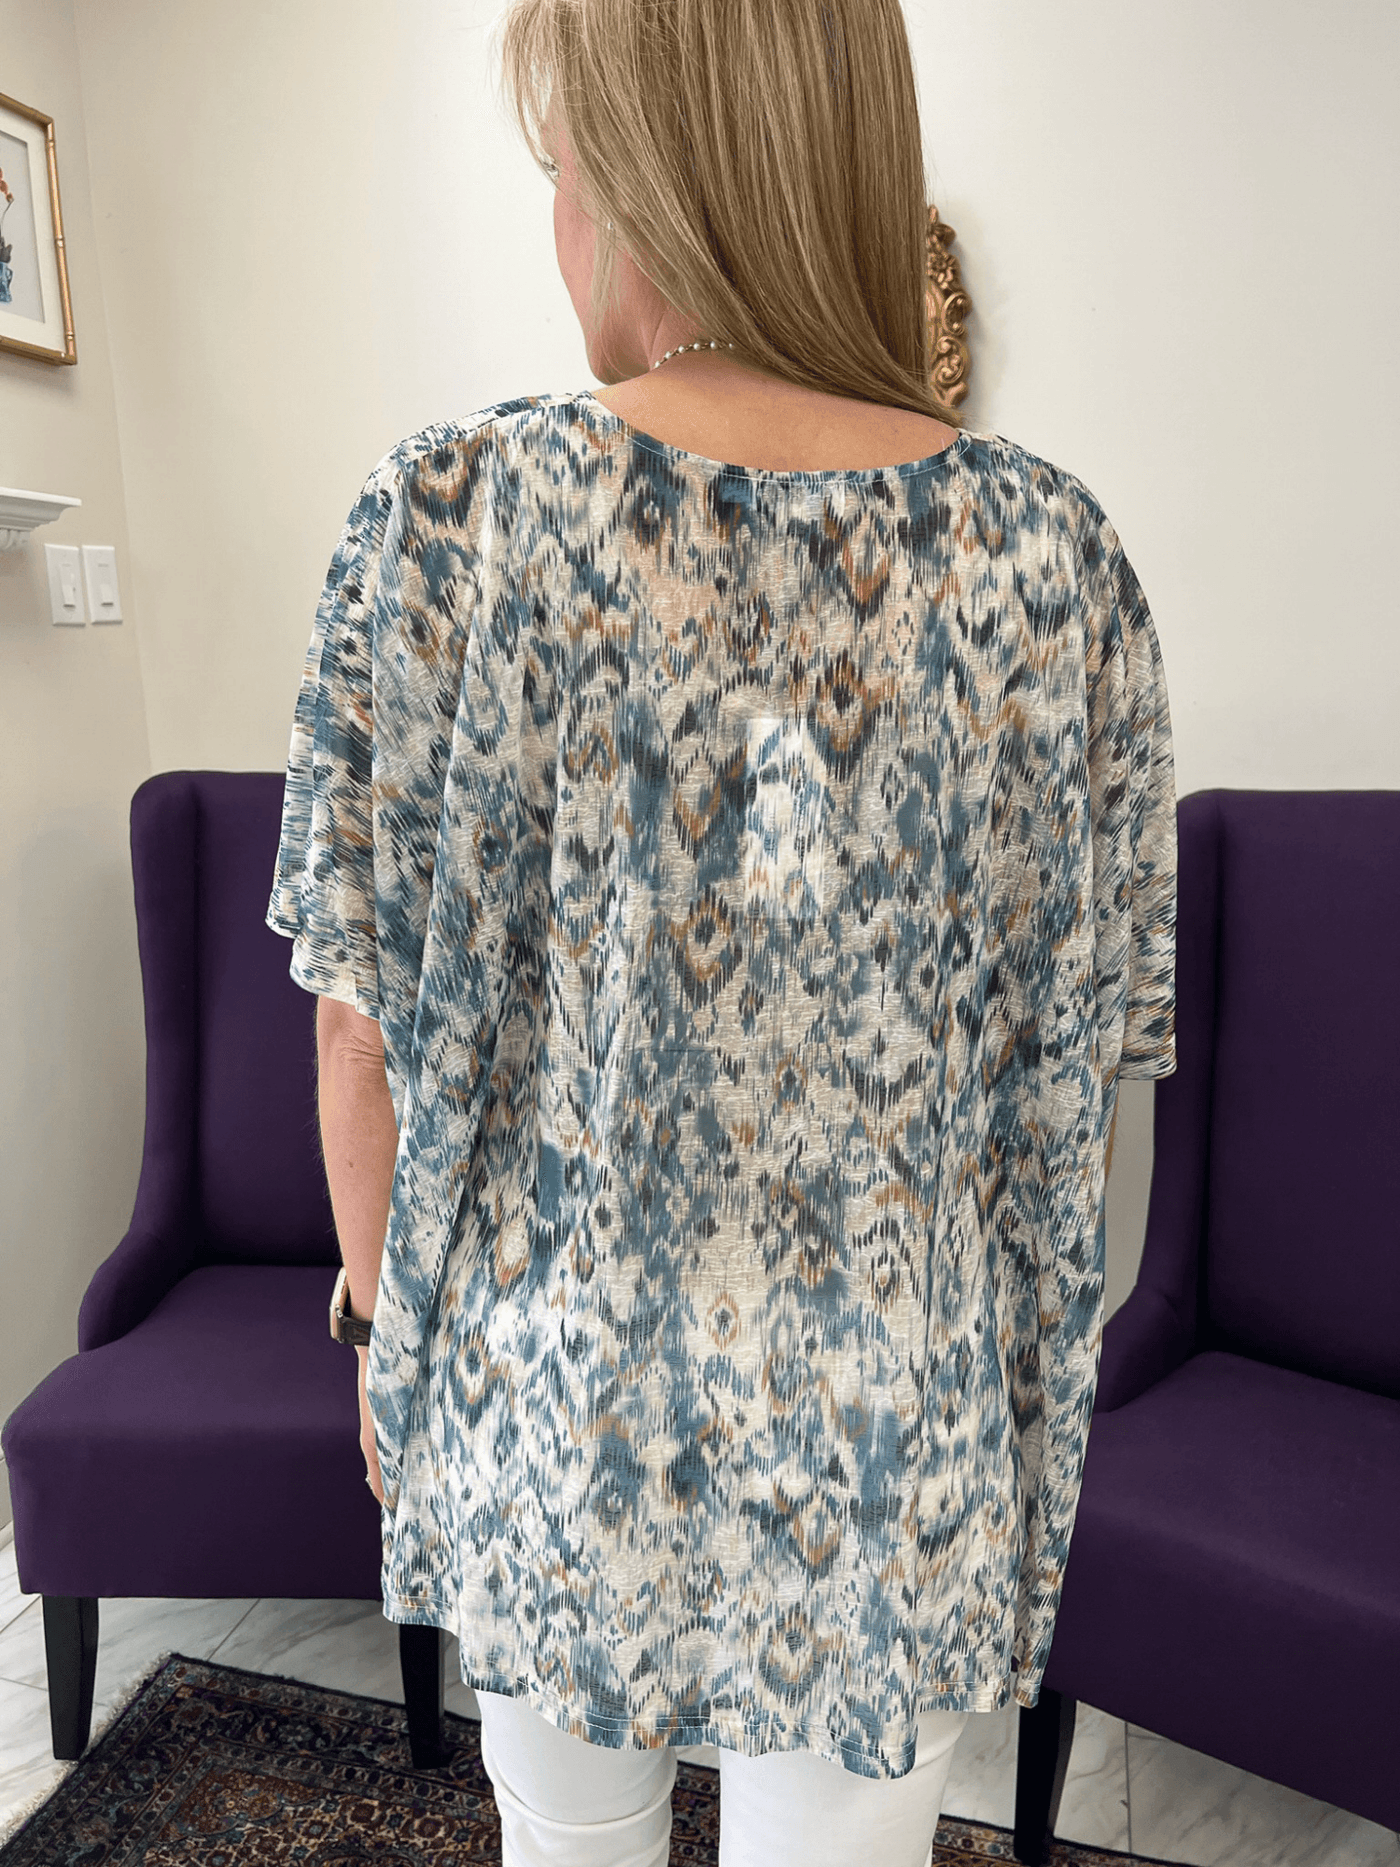 Teal, Taupe and blue Mixed Print Kimono.Back View